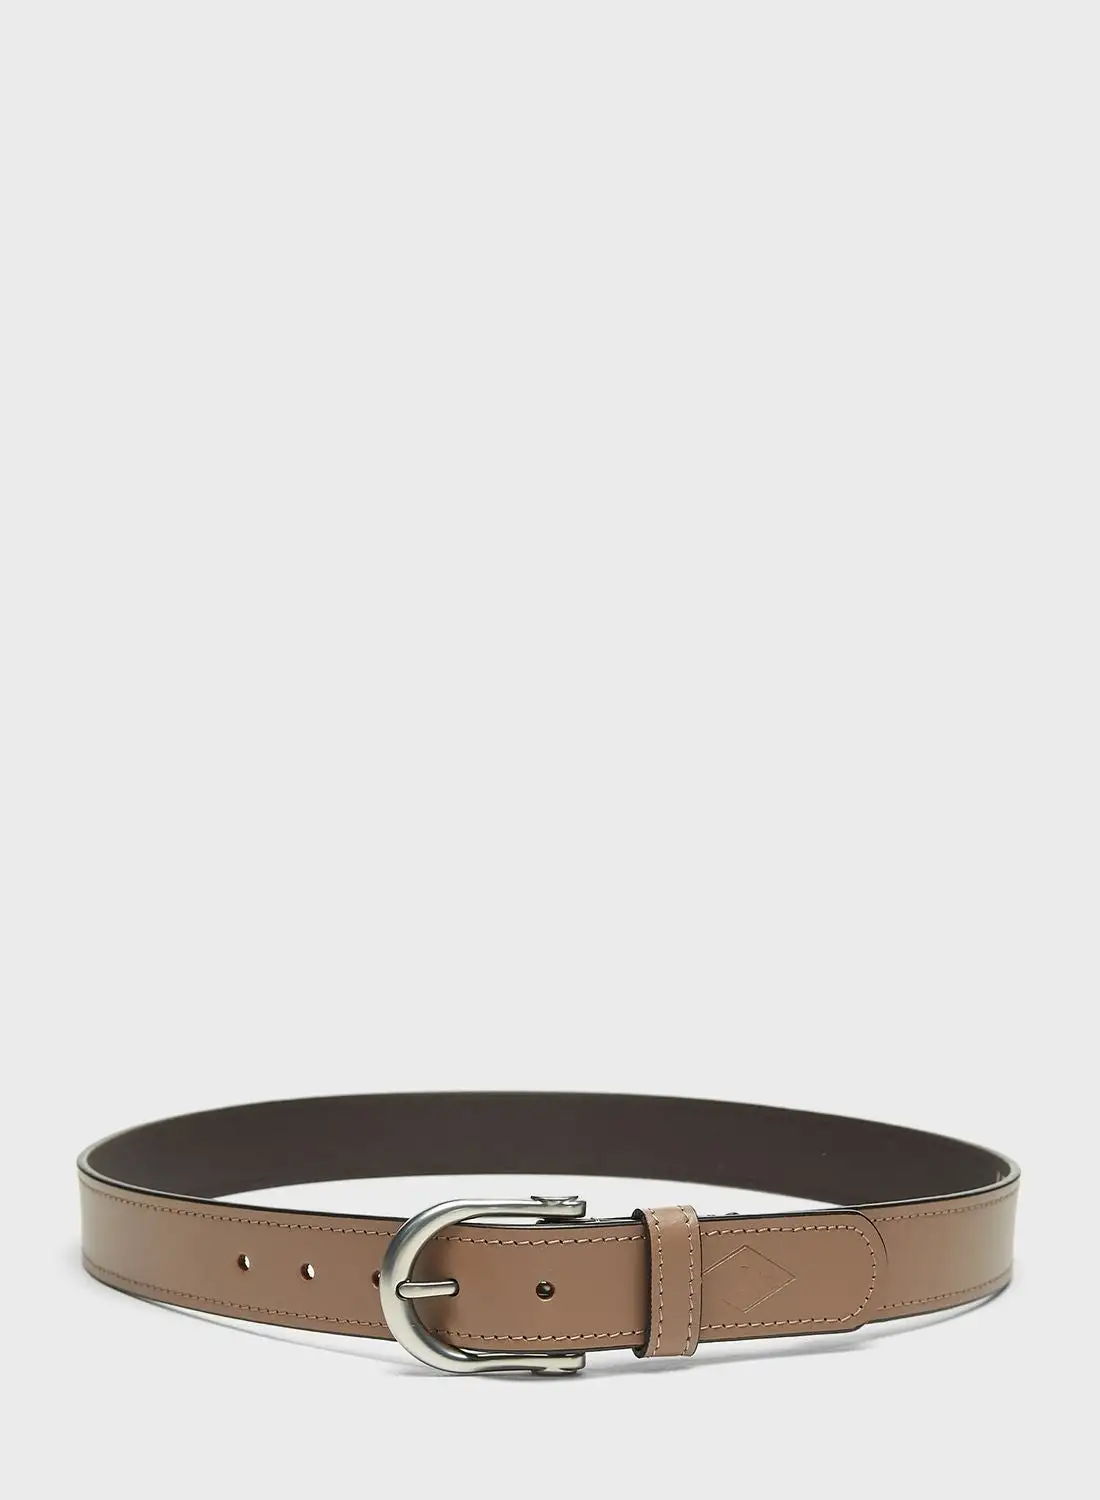 Lee Cooper Pin Buckle Allocated Hole Belt